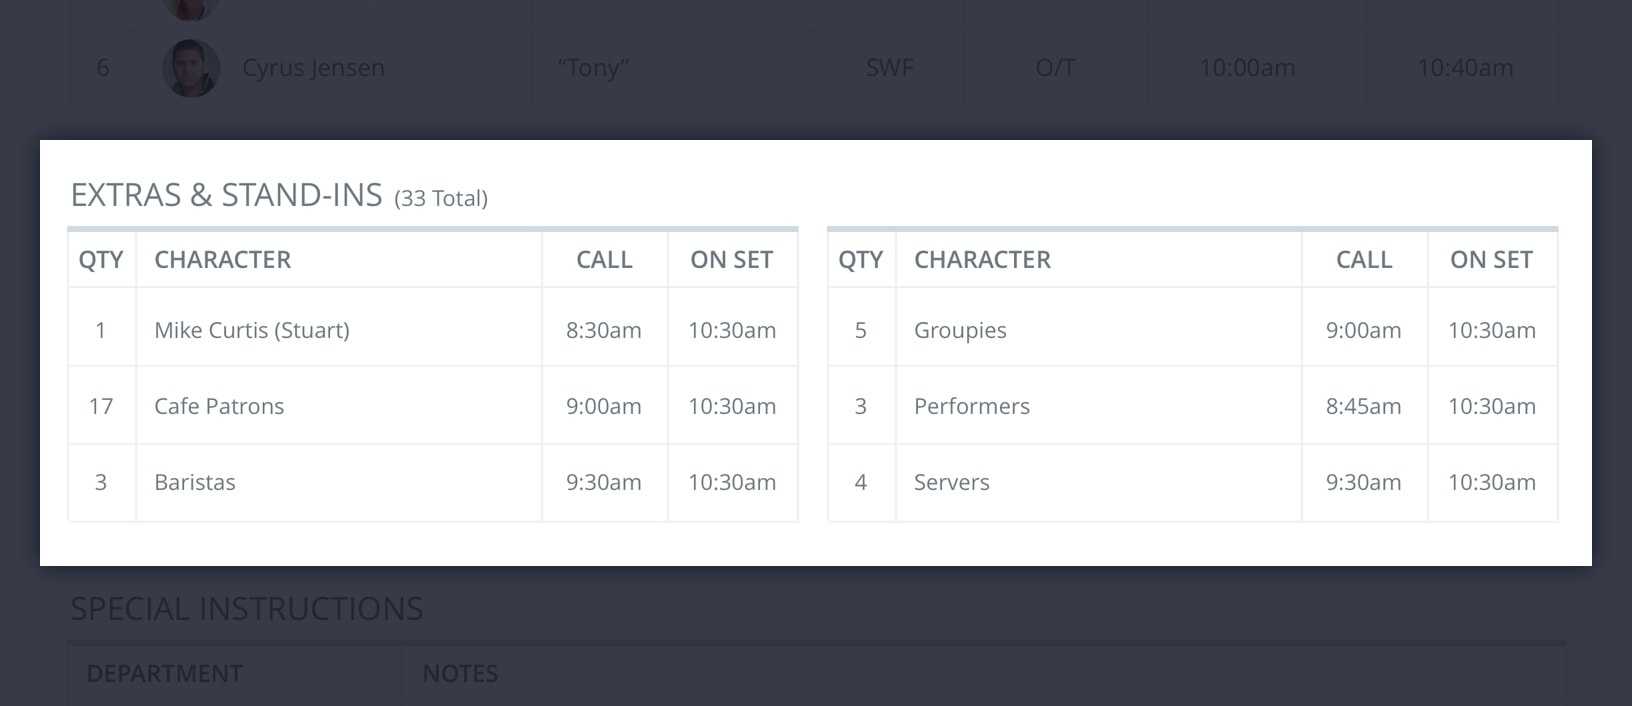 How To Make A Call Sheet For Film And Tv With Blank Call Sheet Template